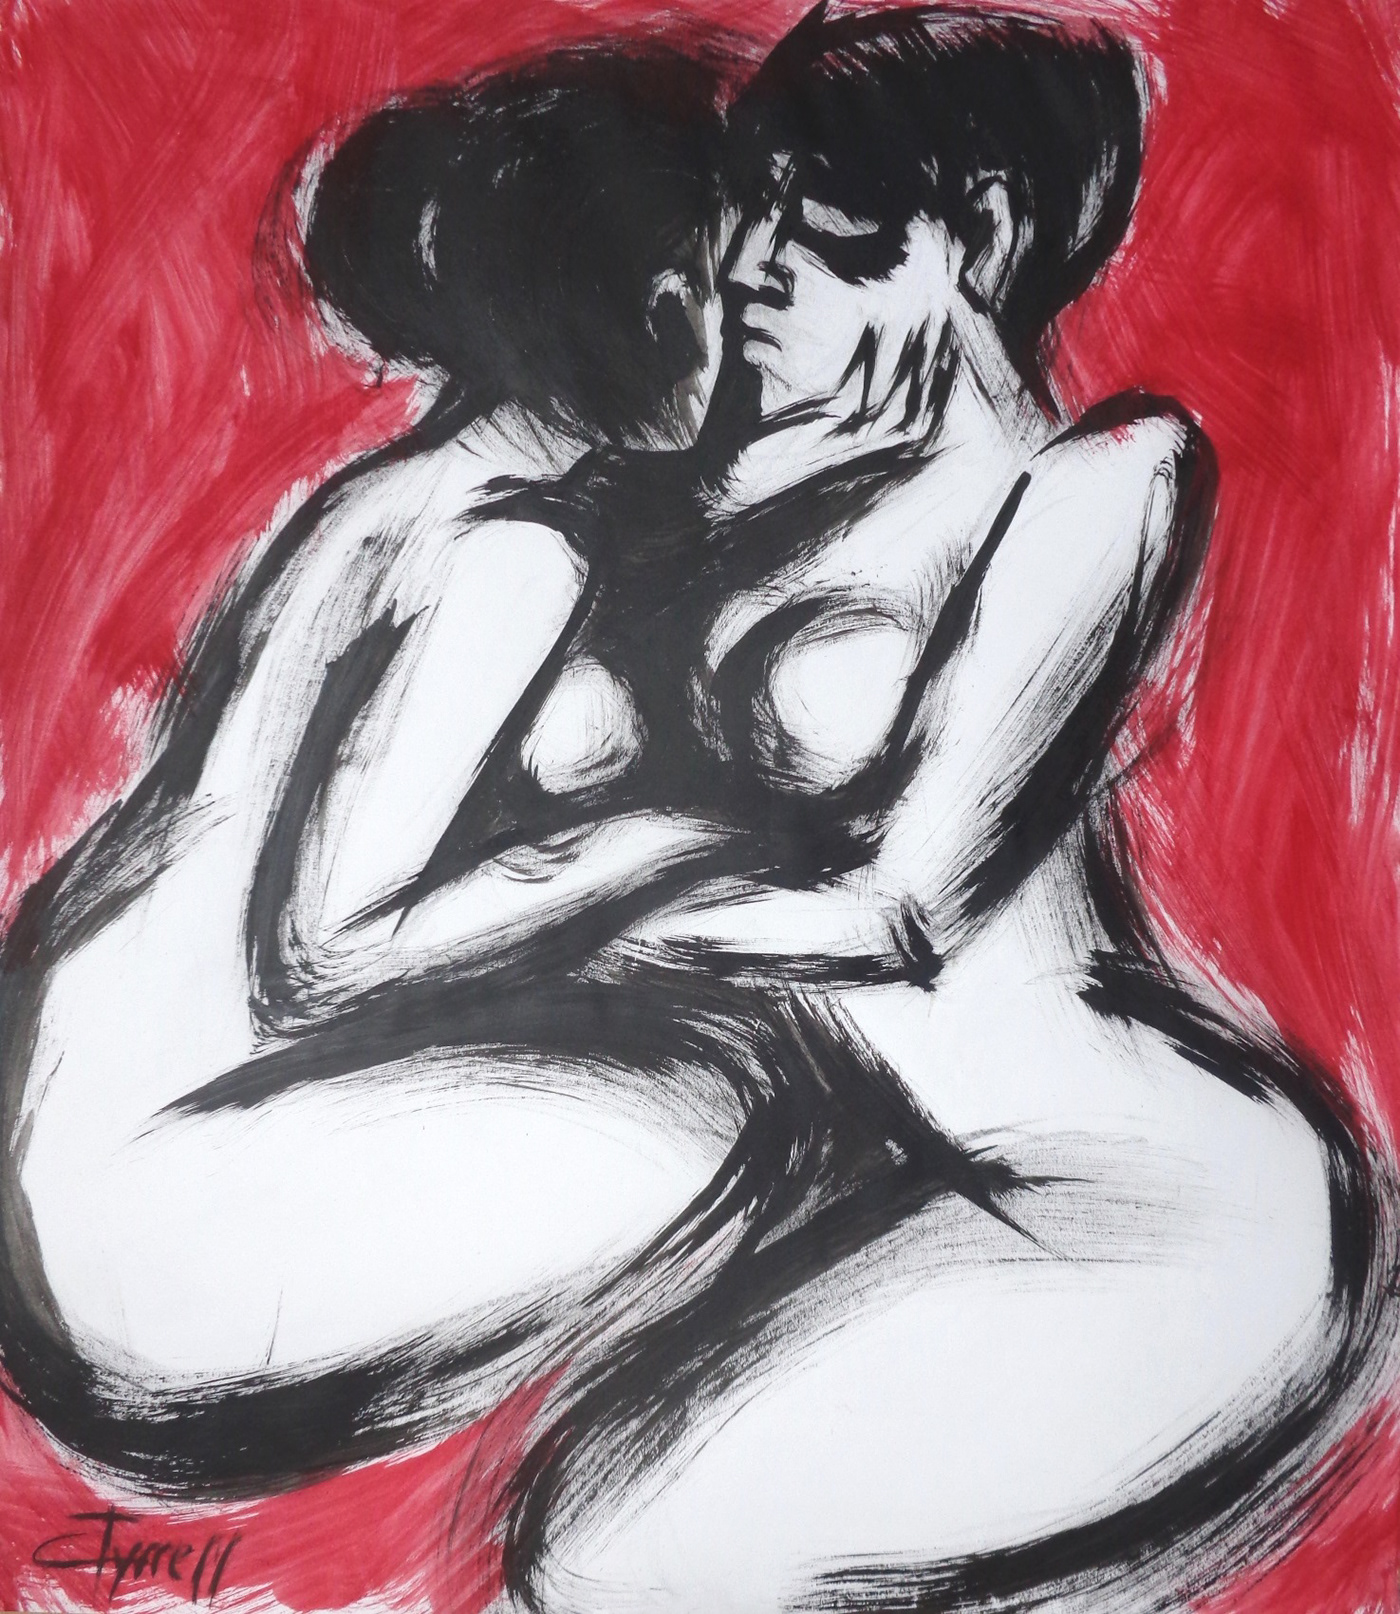 Lovers  paintings  drawings  Couple  in love kiss  hags appasionata  passion  love contemporary  inks charcoal  paper